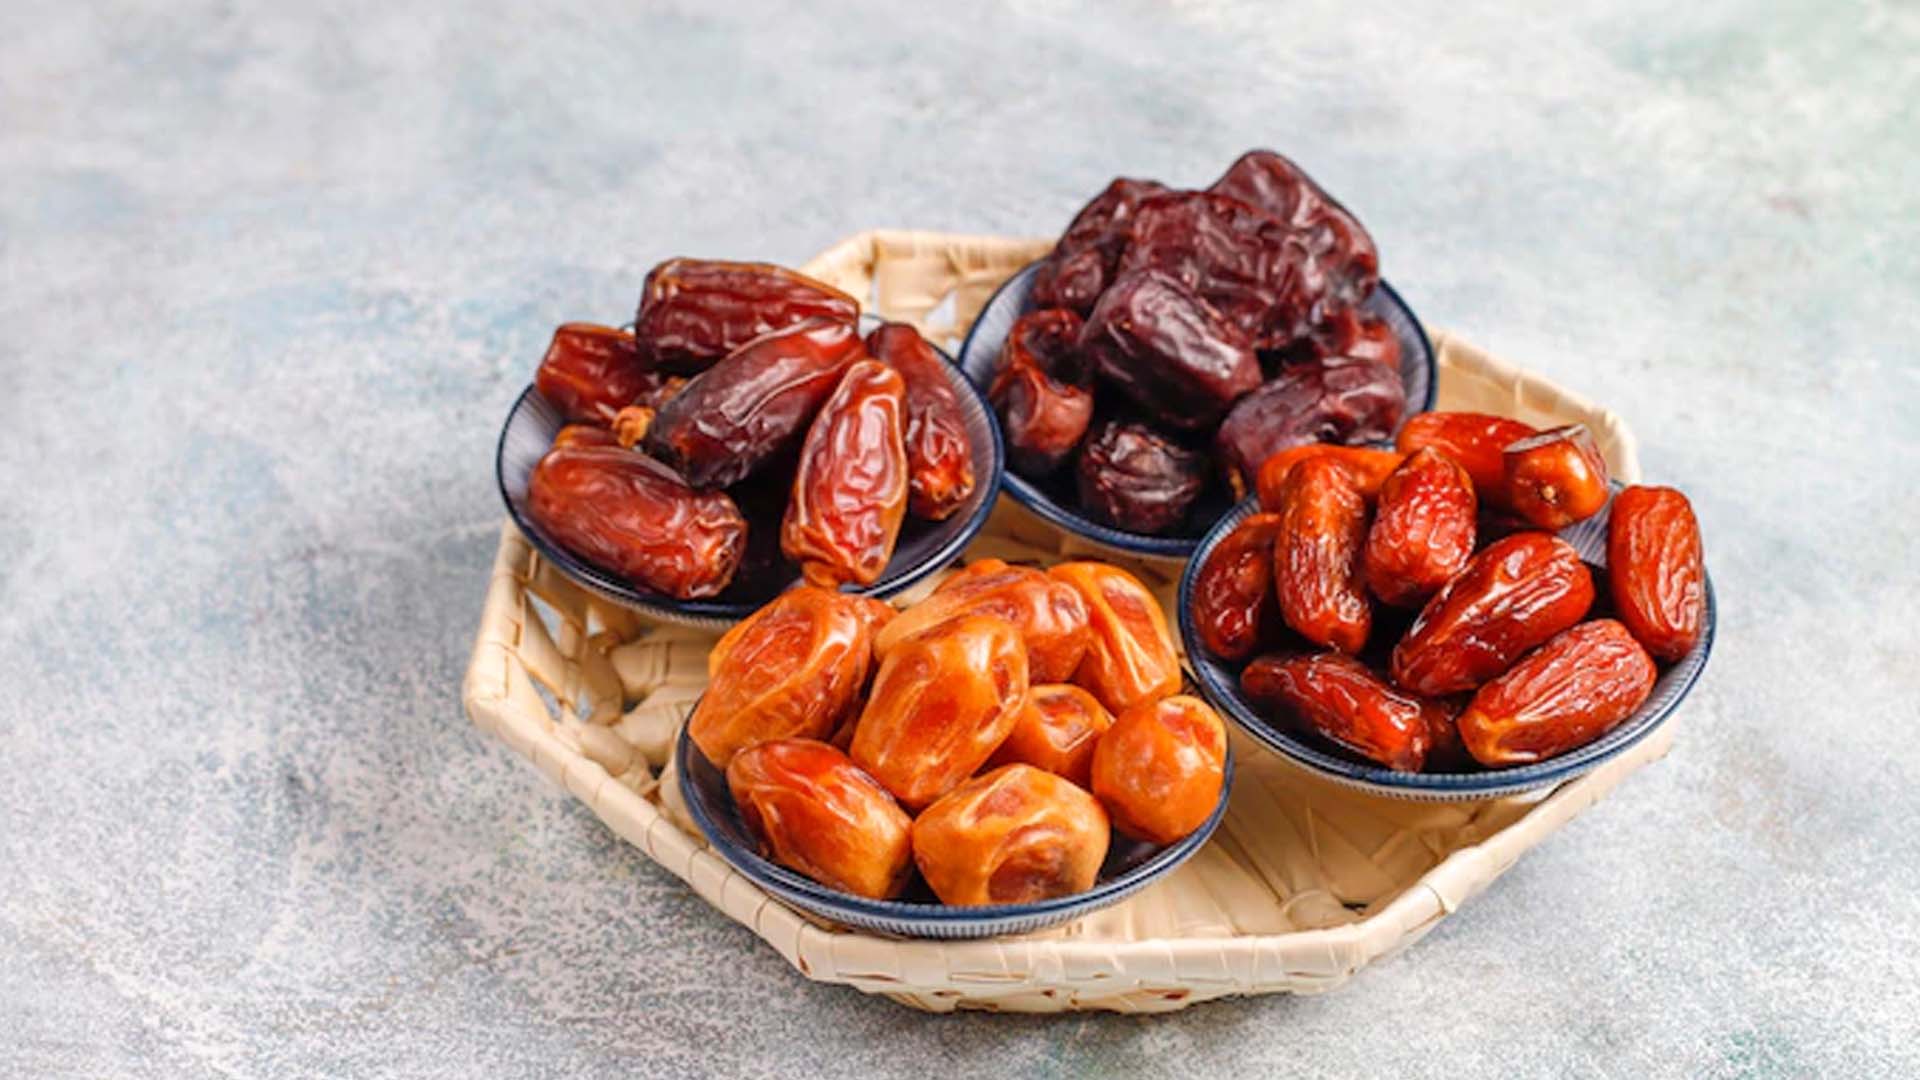 8 Health Benefits and Nutritional Values of Dried Dates